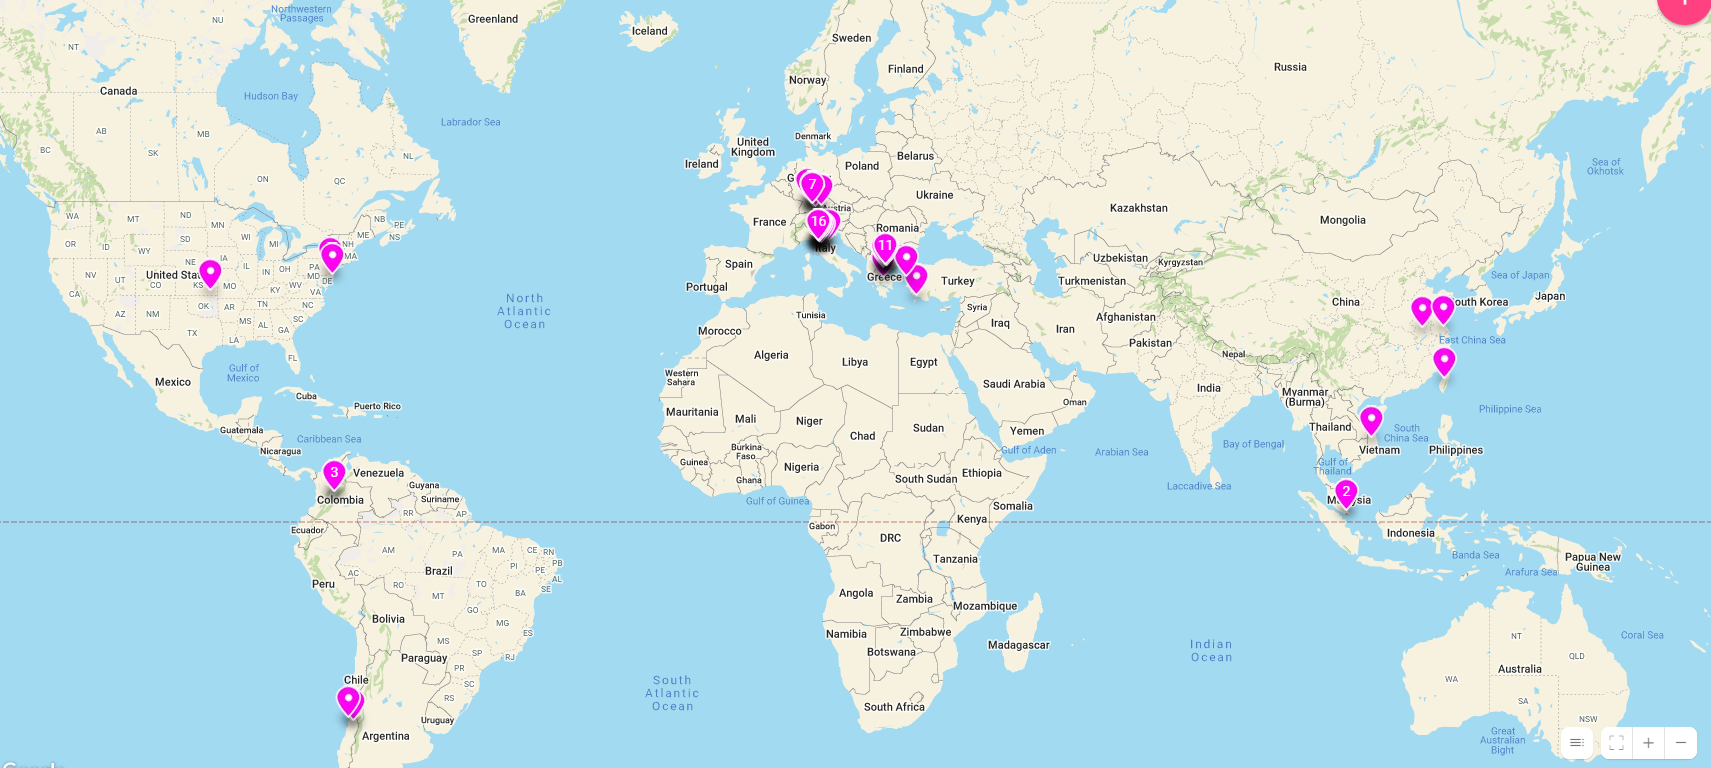 A digital map of the world shows red pins in various countries, representing the hometowns of participants at Stockton University's world language tables.